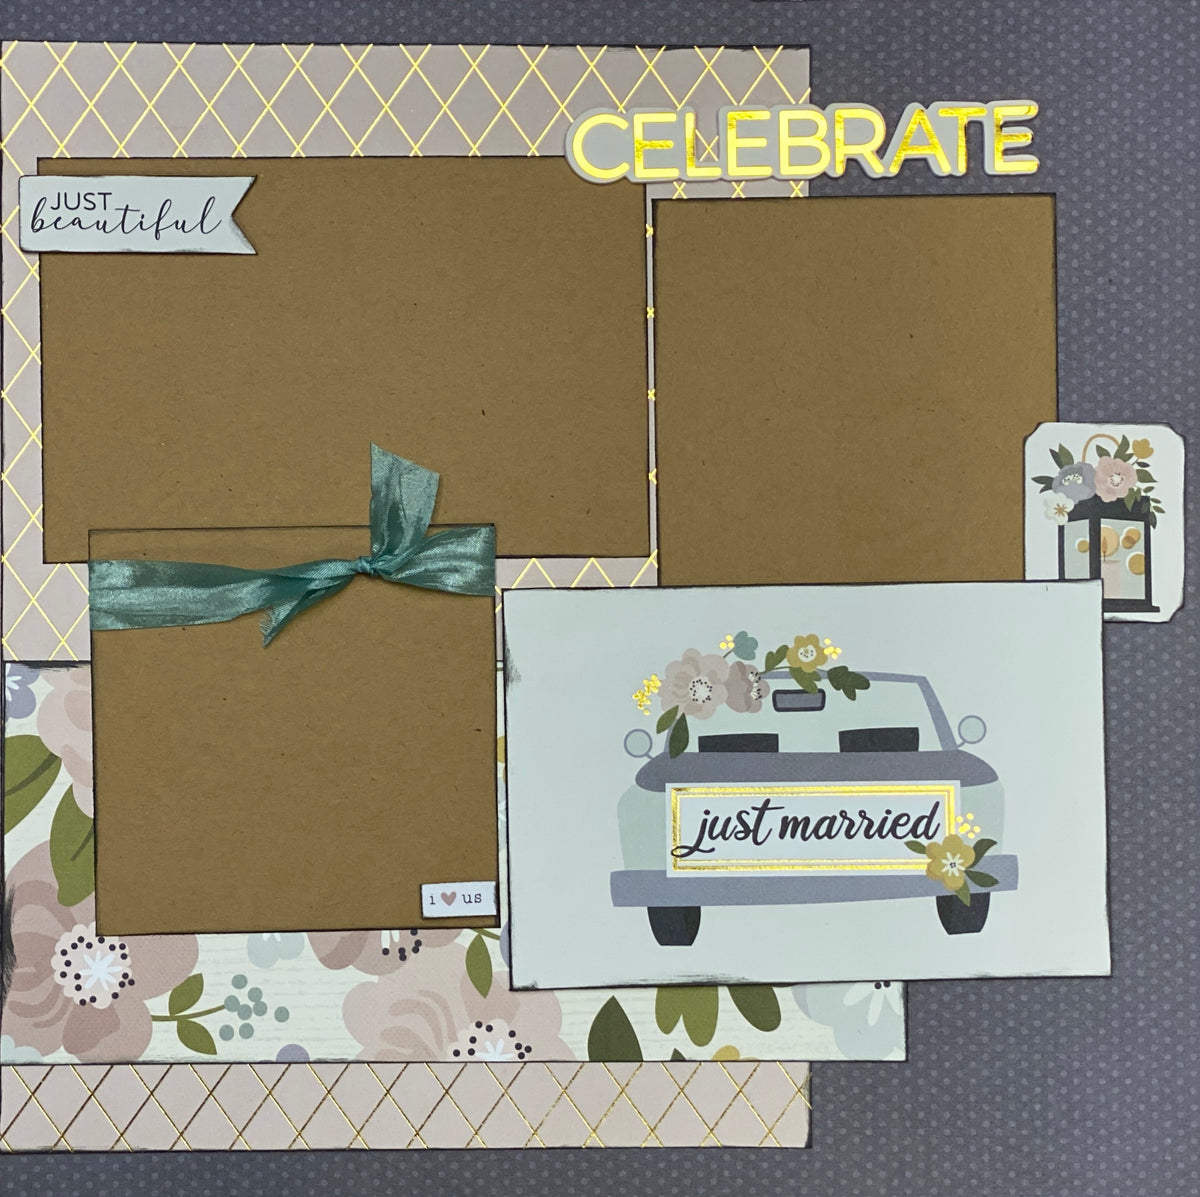 Celebrate your happily ever after with this wedding scrapbook layout!  #WeddingScrapbook …